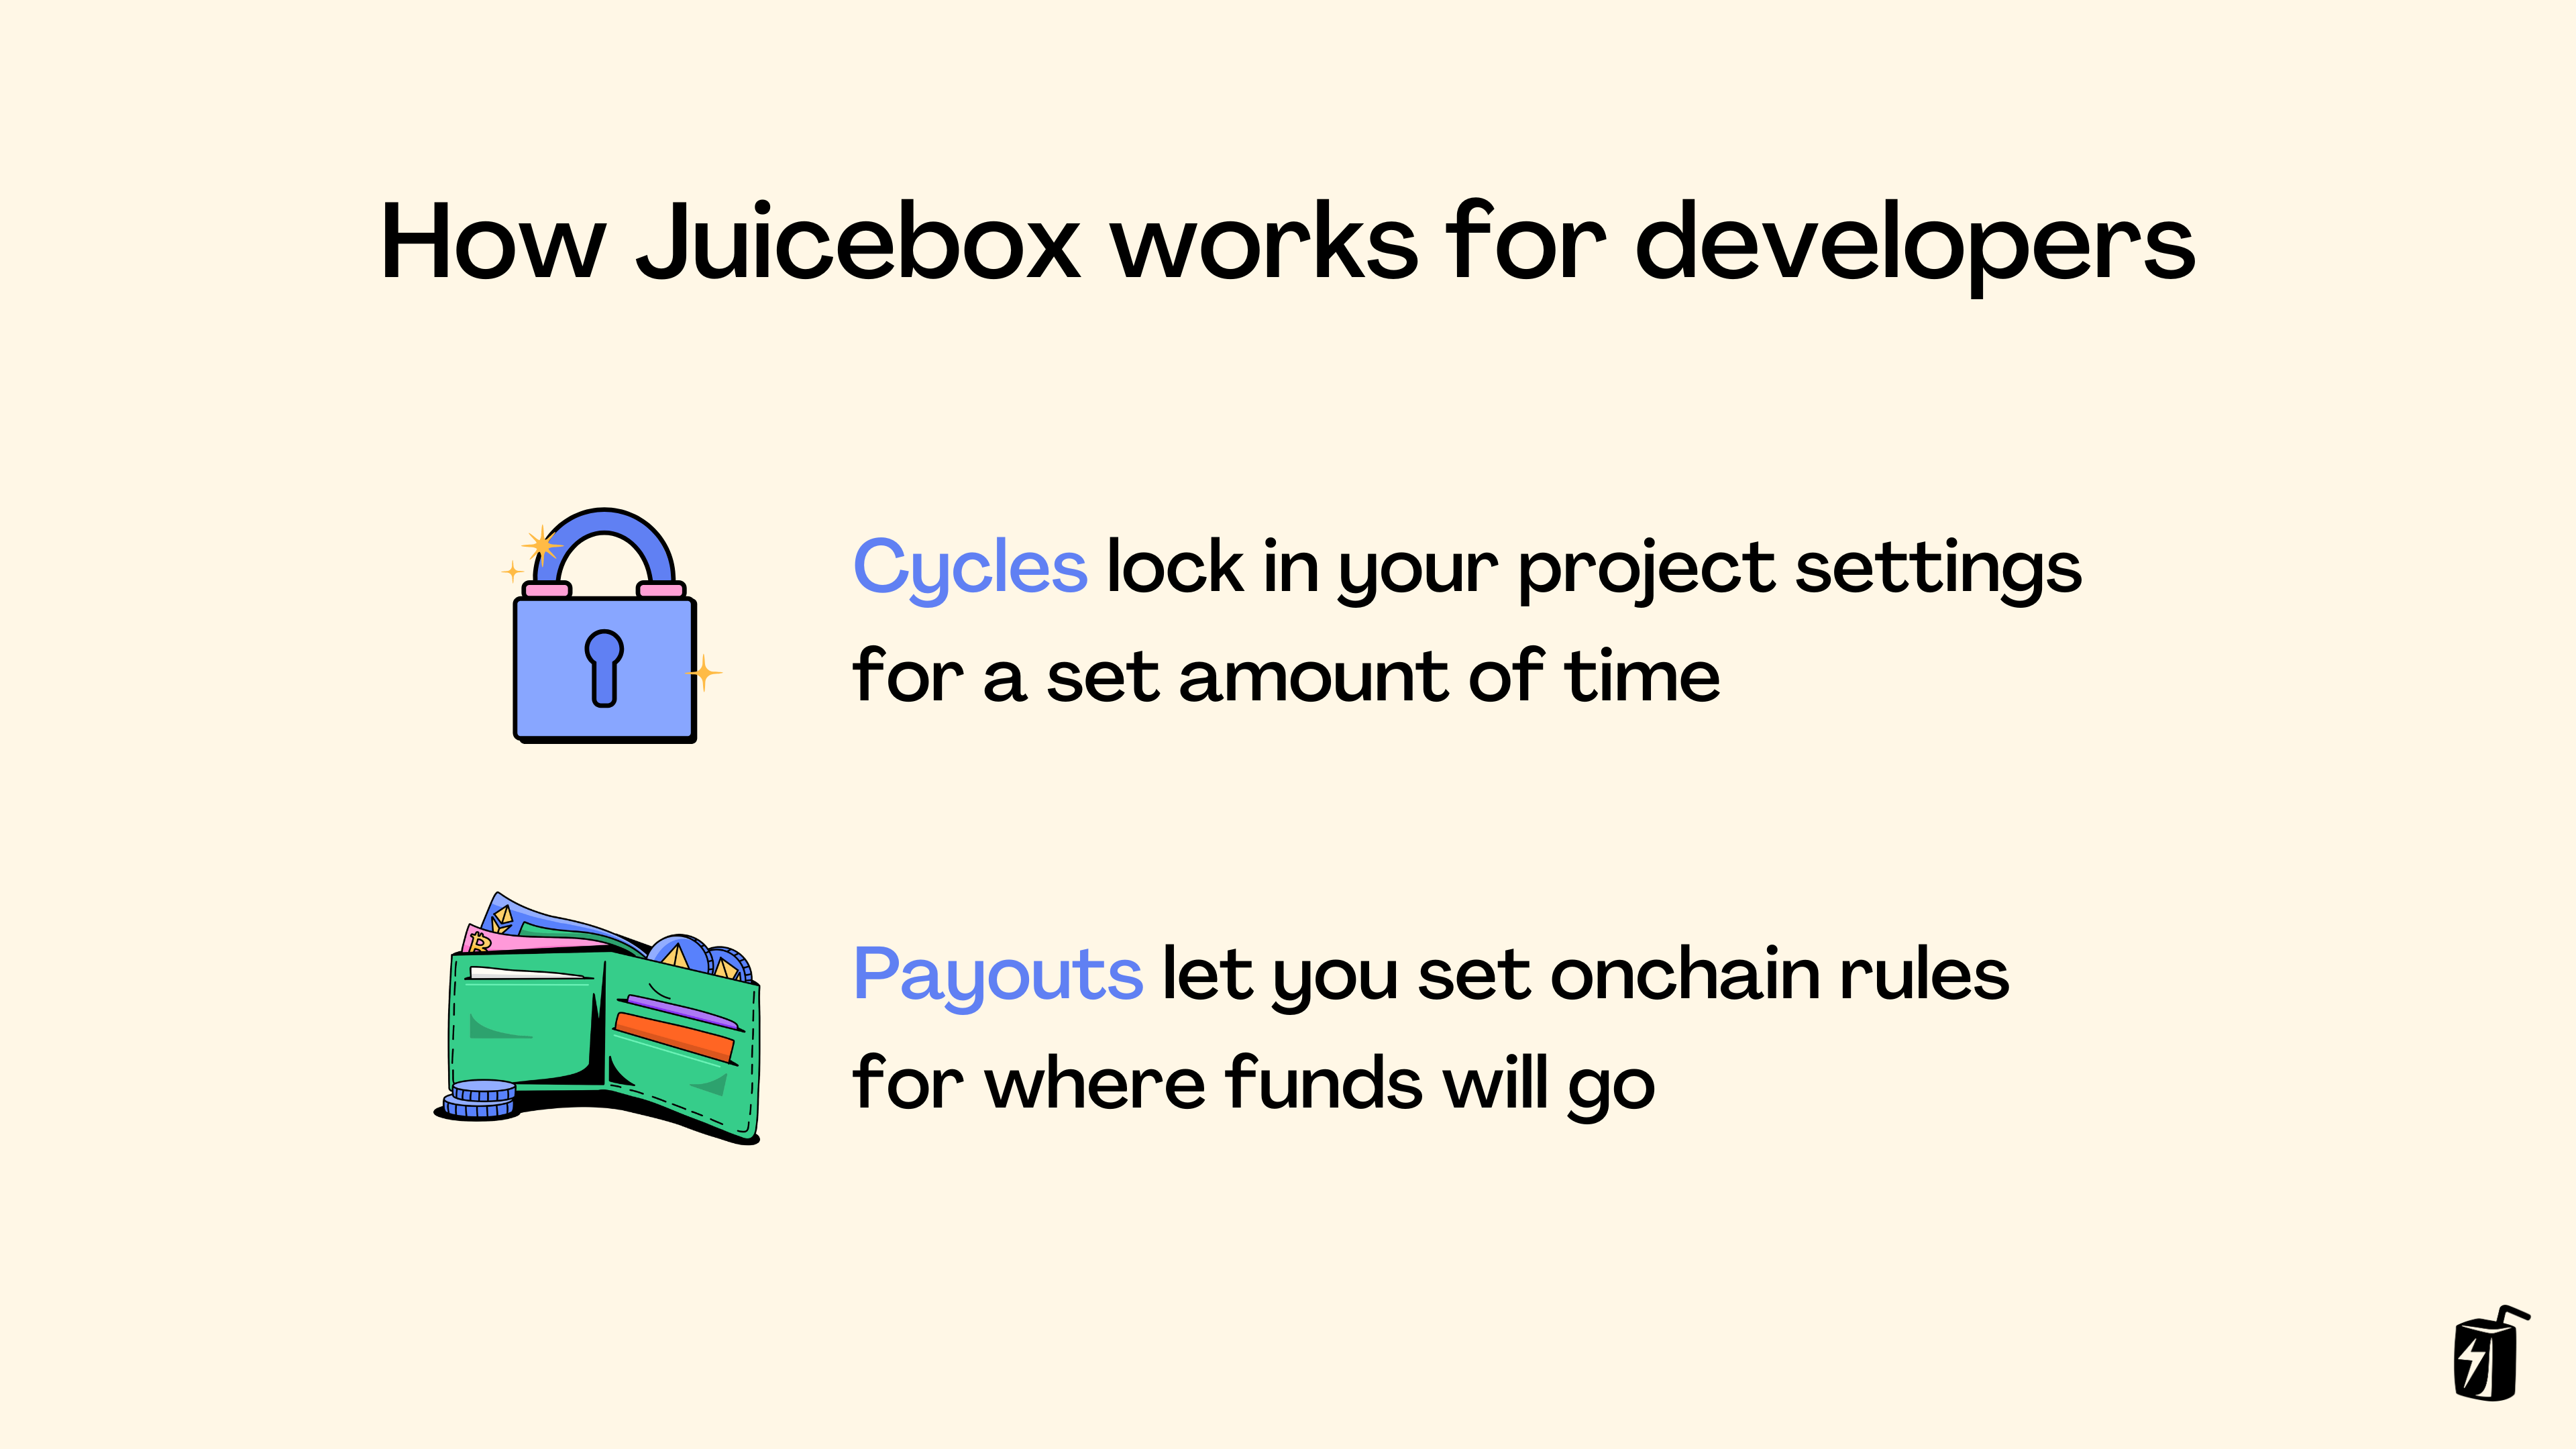 Remember, cycles lock in project settings and payouts let you set onchain rules for where funds will go